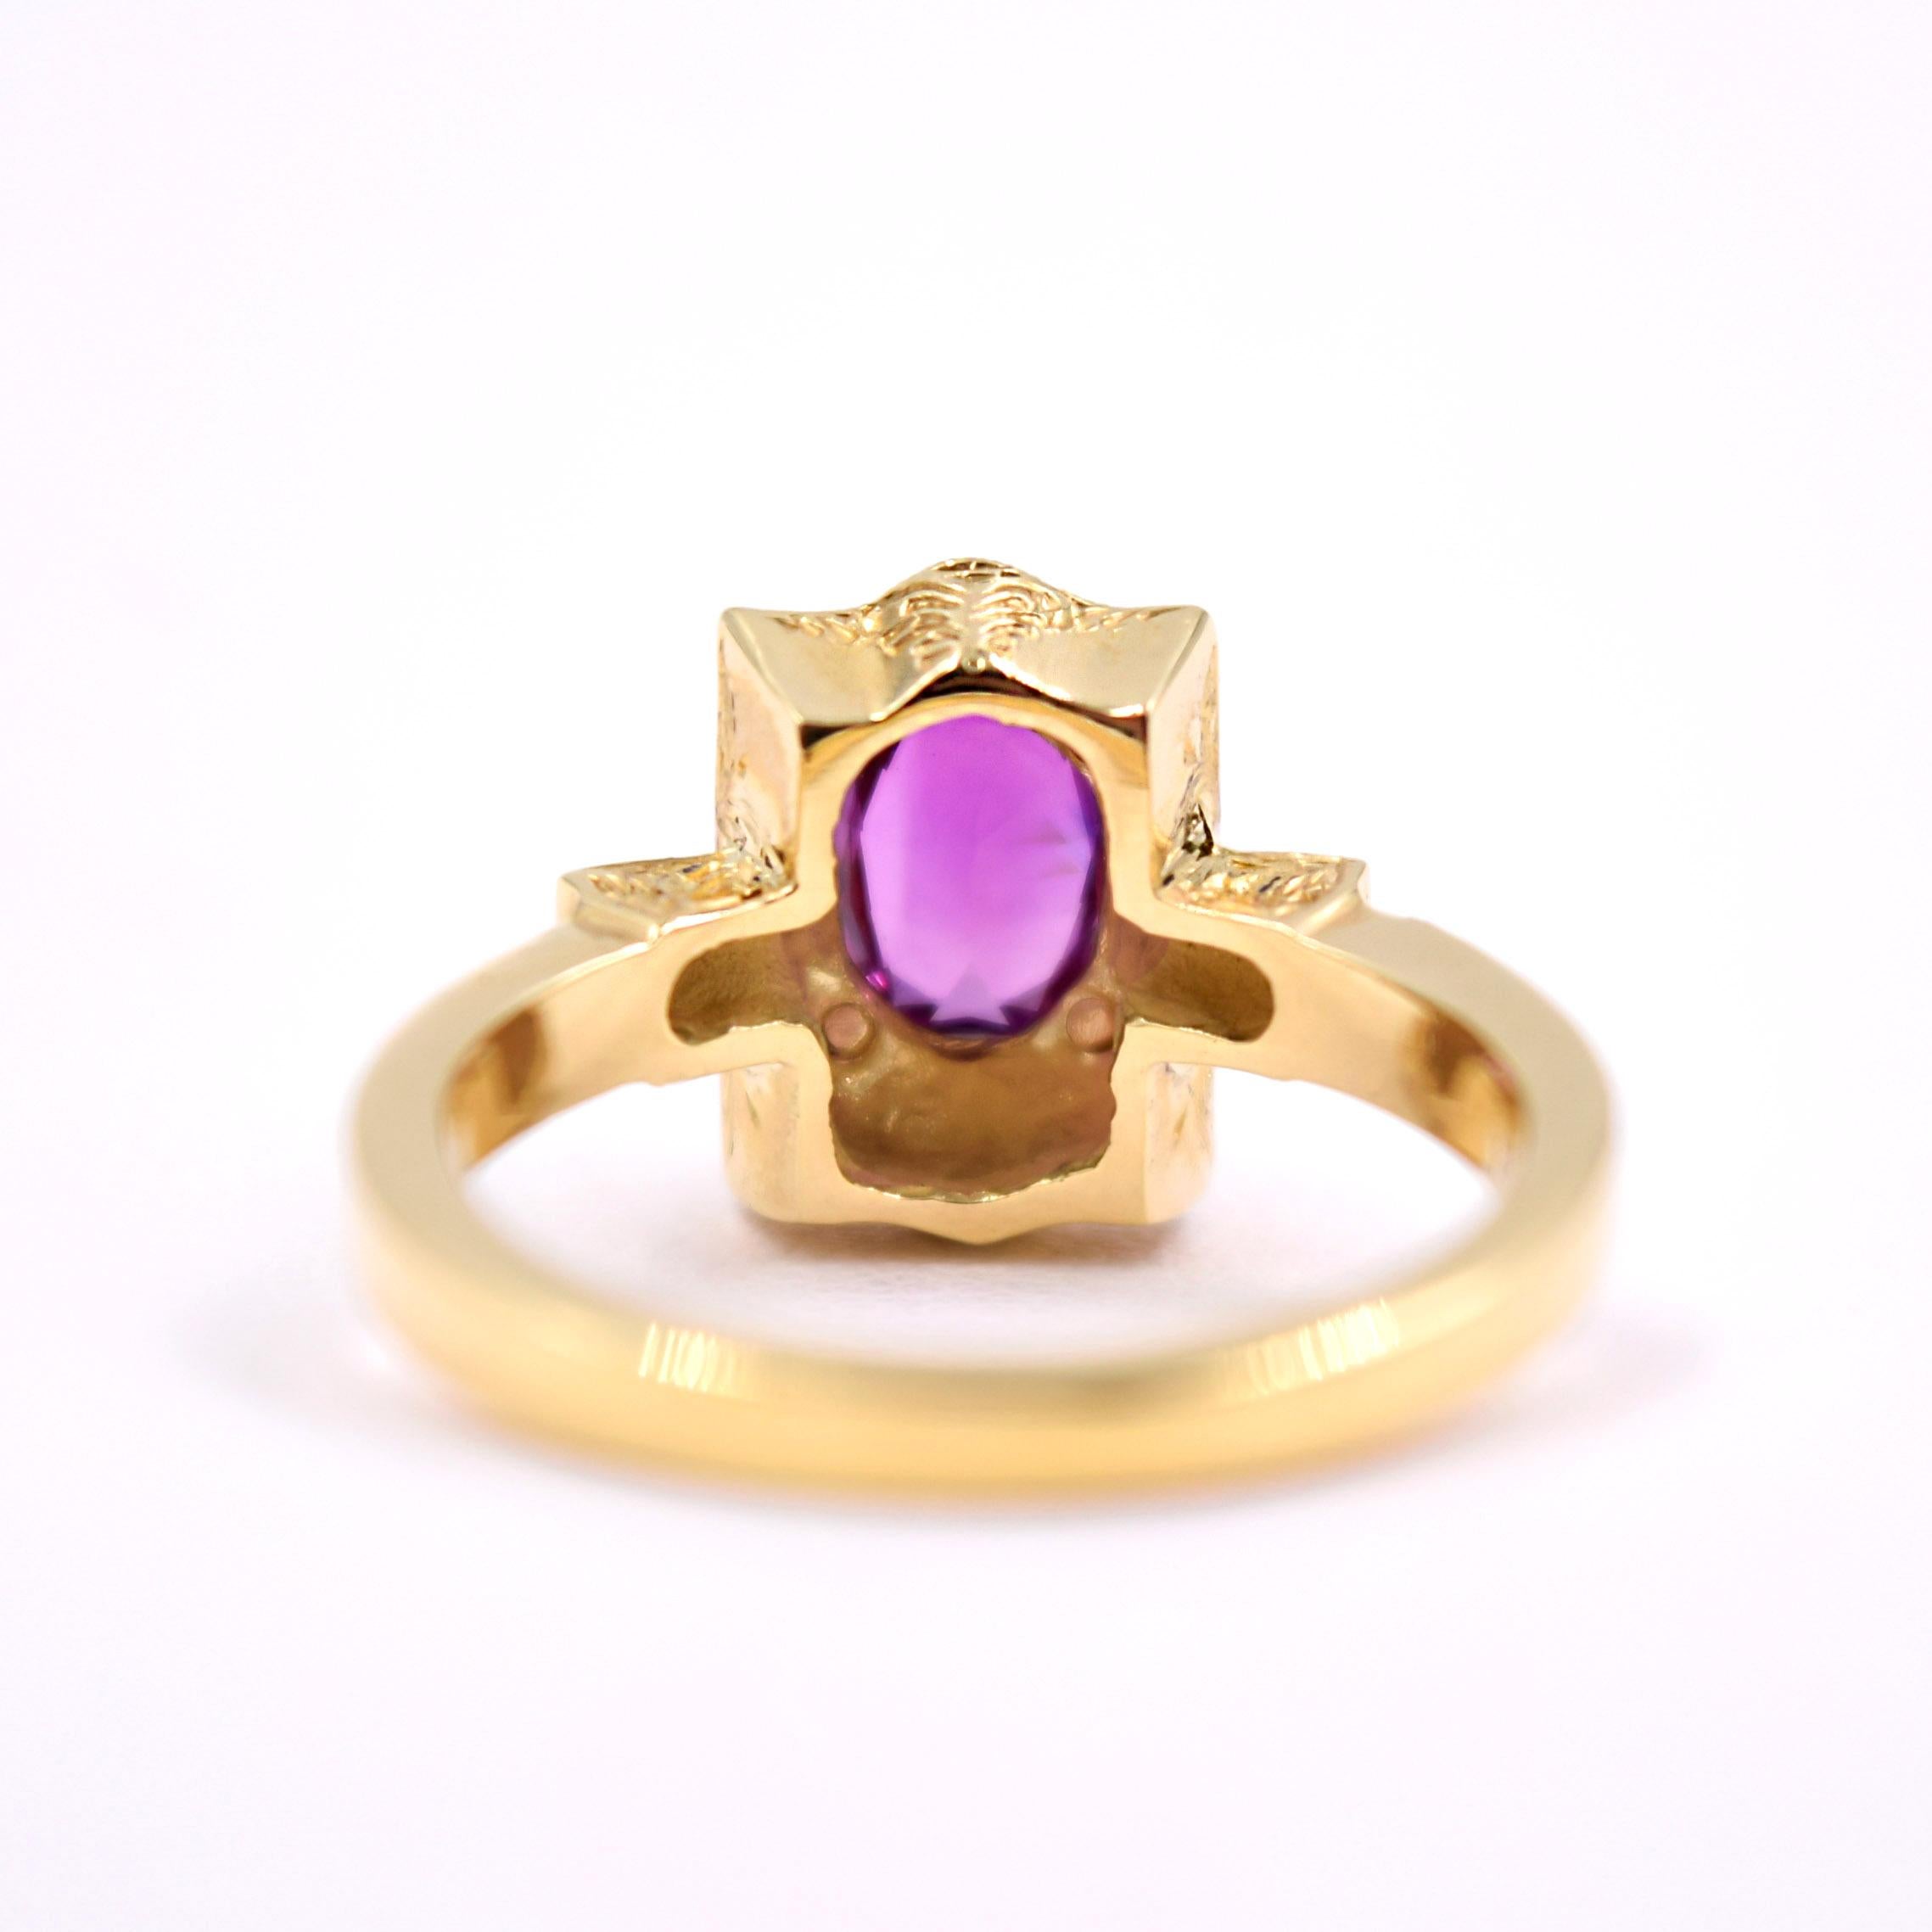 - victorian inspired design
- 1.10 carat faceted oval pink sapphire, vivid color
- .15 carats G VS diamonds pave set 
- features beautiful hand engraved details
- 18 karat yellow gold
- size 6.5 and can be sized